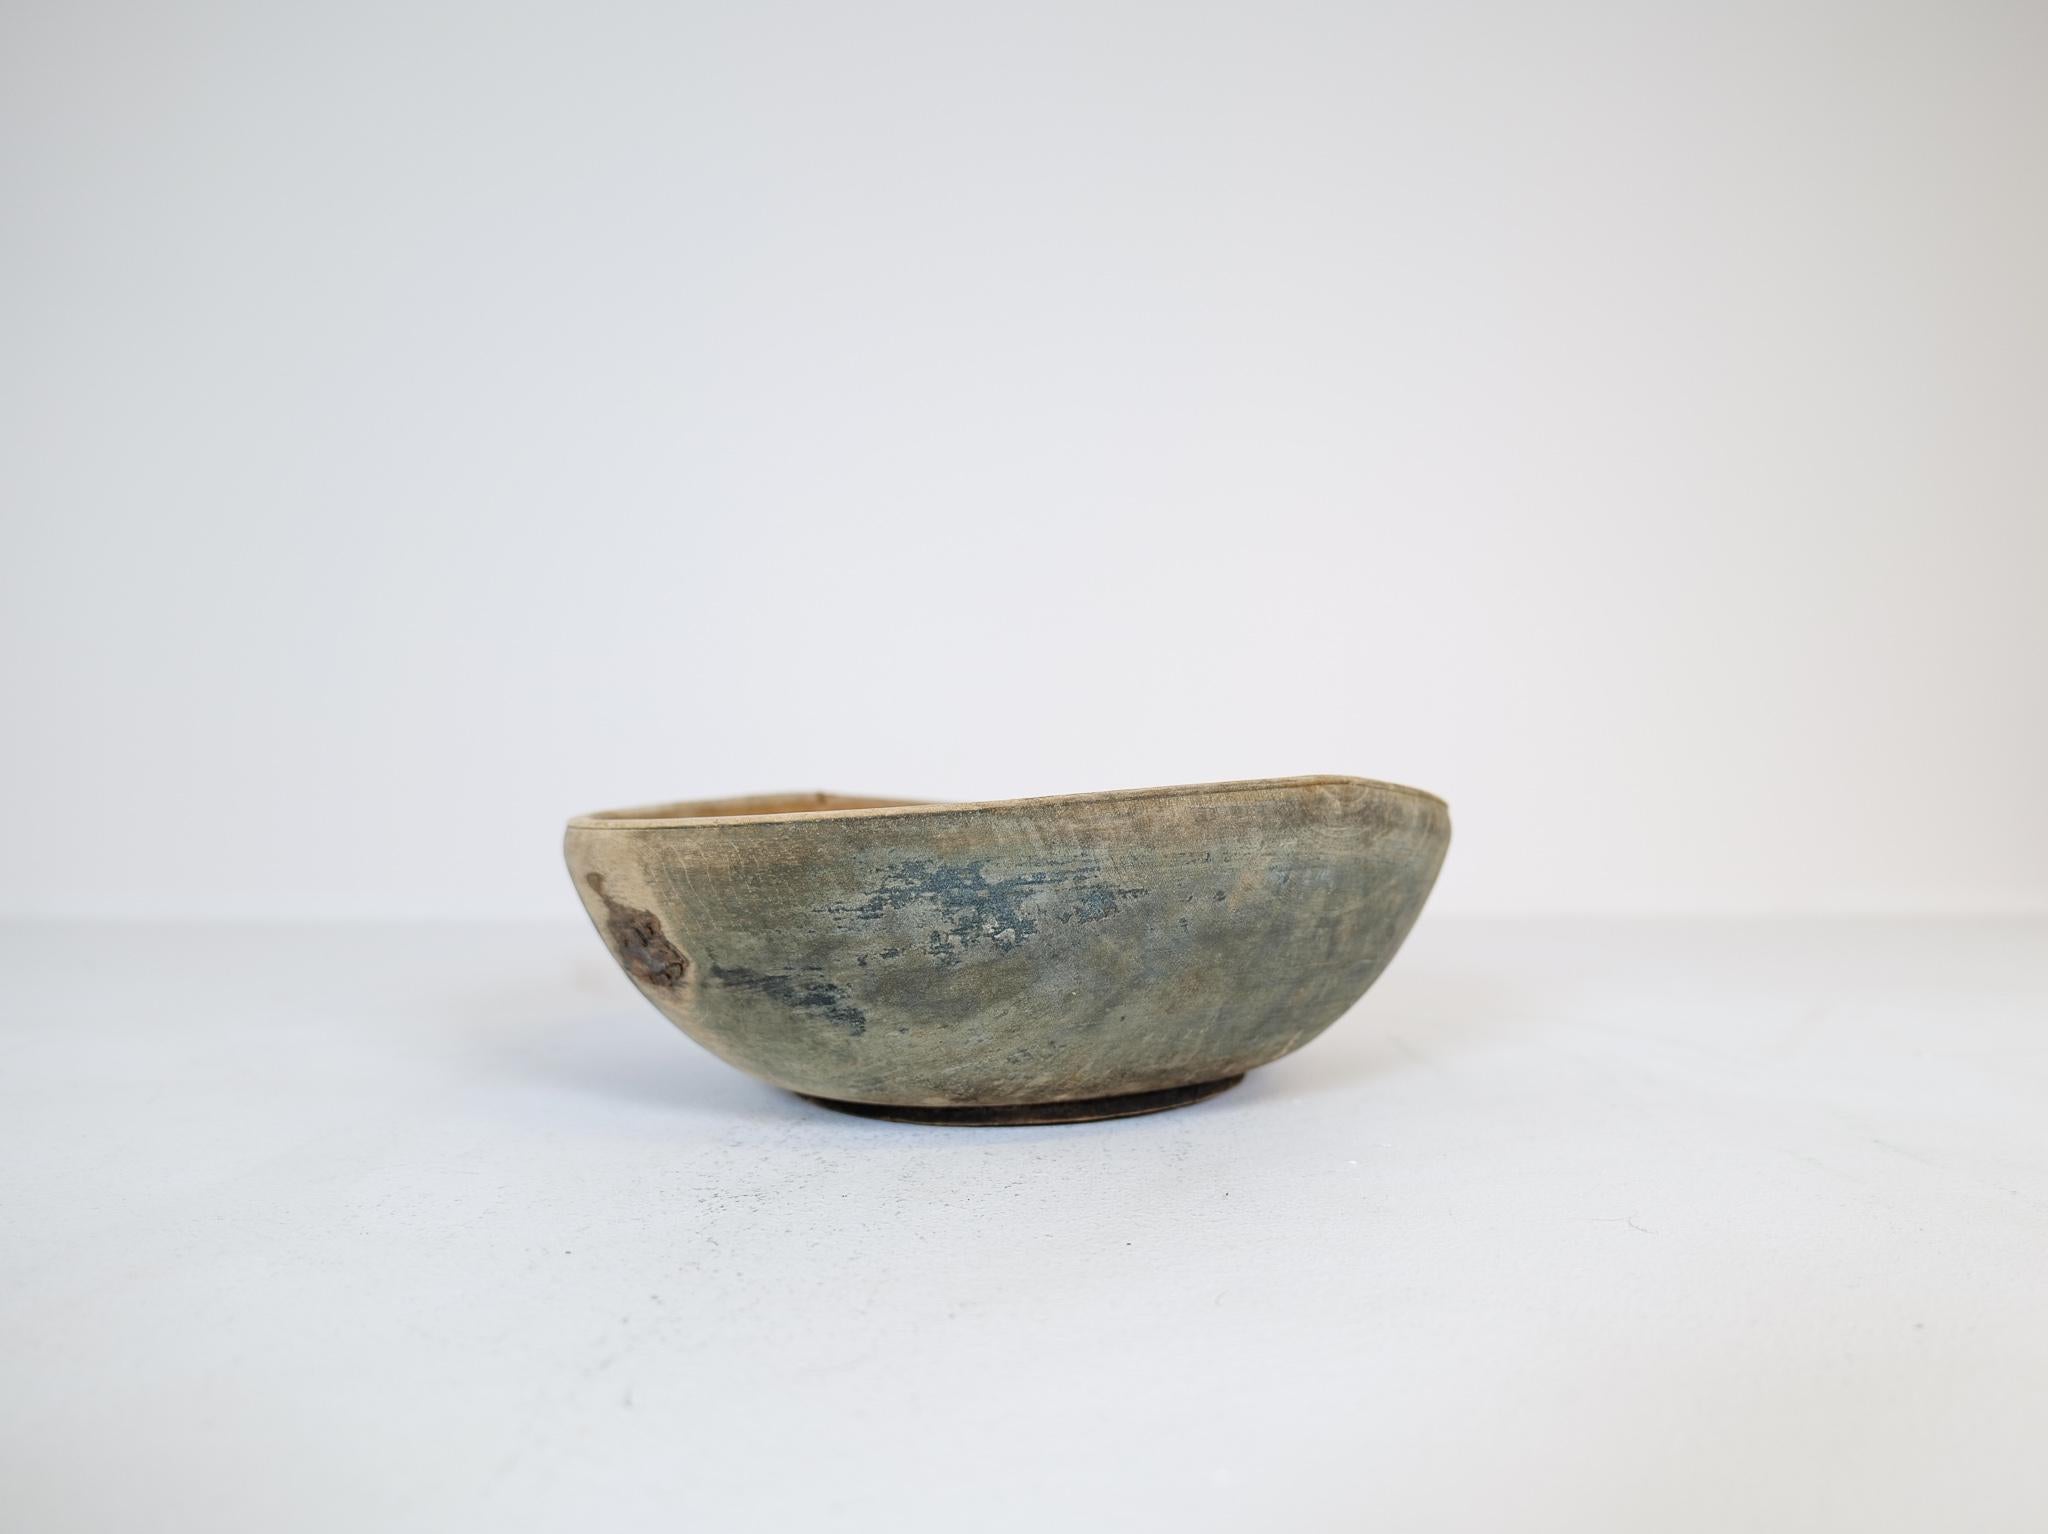 An large antique and unique organic wooden bowl. With highly appealing patina, with traces of use. This one in a unique blue painted color thats been patinated during its time. Produced in Sweden, 19th century. 
These bowls where very important for